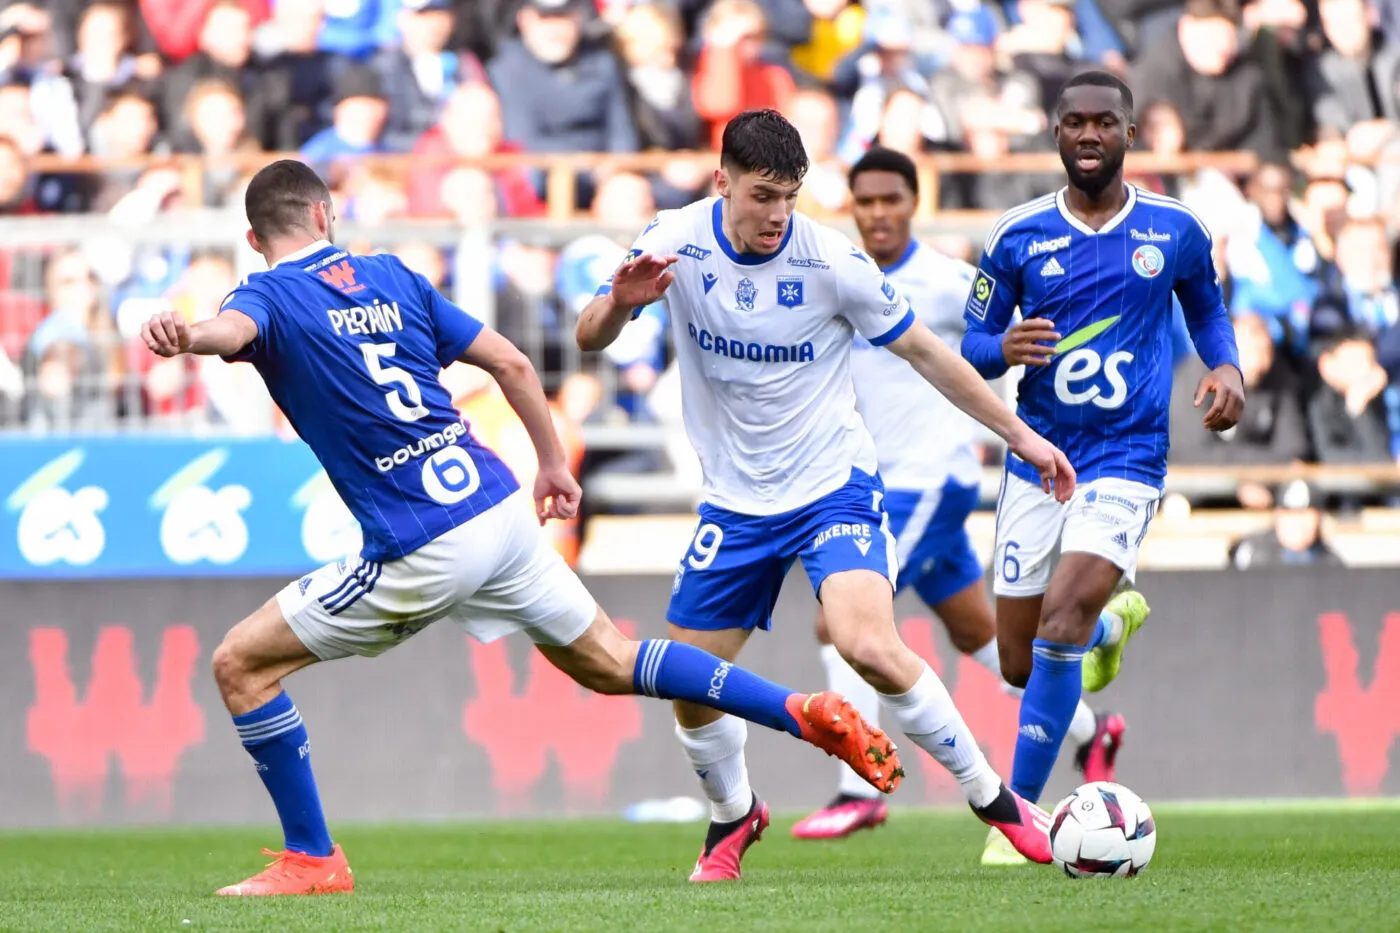 Lucas PERRIN of Racing Club de Strasbourg,Jean Eudes AHOLOU of Racing Club de Strasbourg and Matthis ABLINE of Auxerre during the Ligue 1 Uber Eats match between Strasbourg and Auxerre at La Meinau Stadium on March 19, 2023 in Strasbourg, France. (Photo by Franco Arland/Icon Sport)